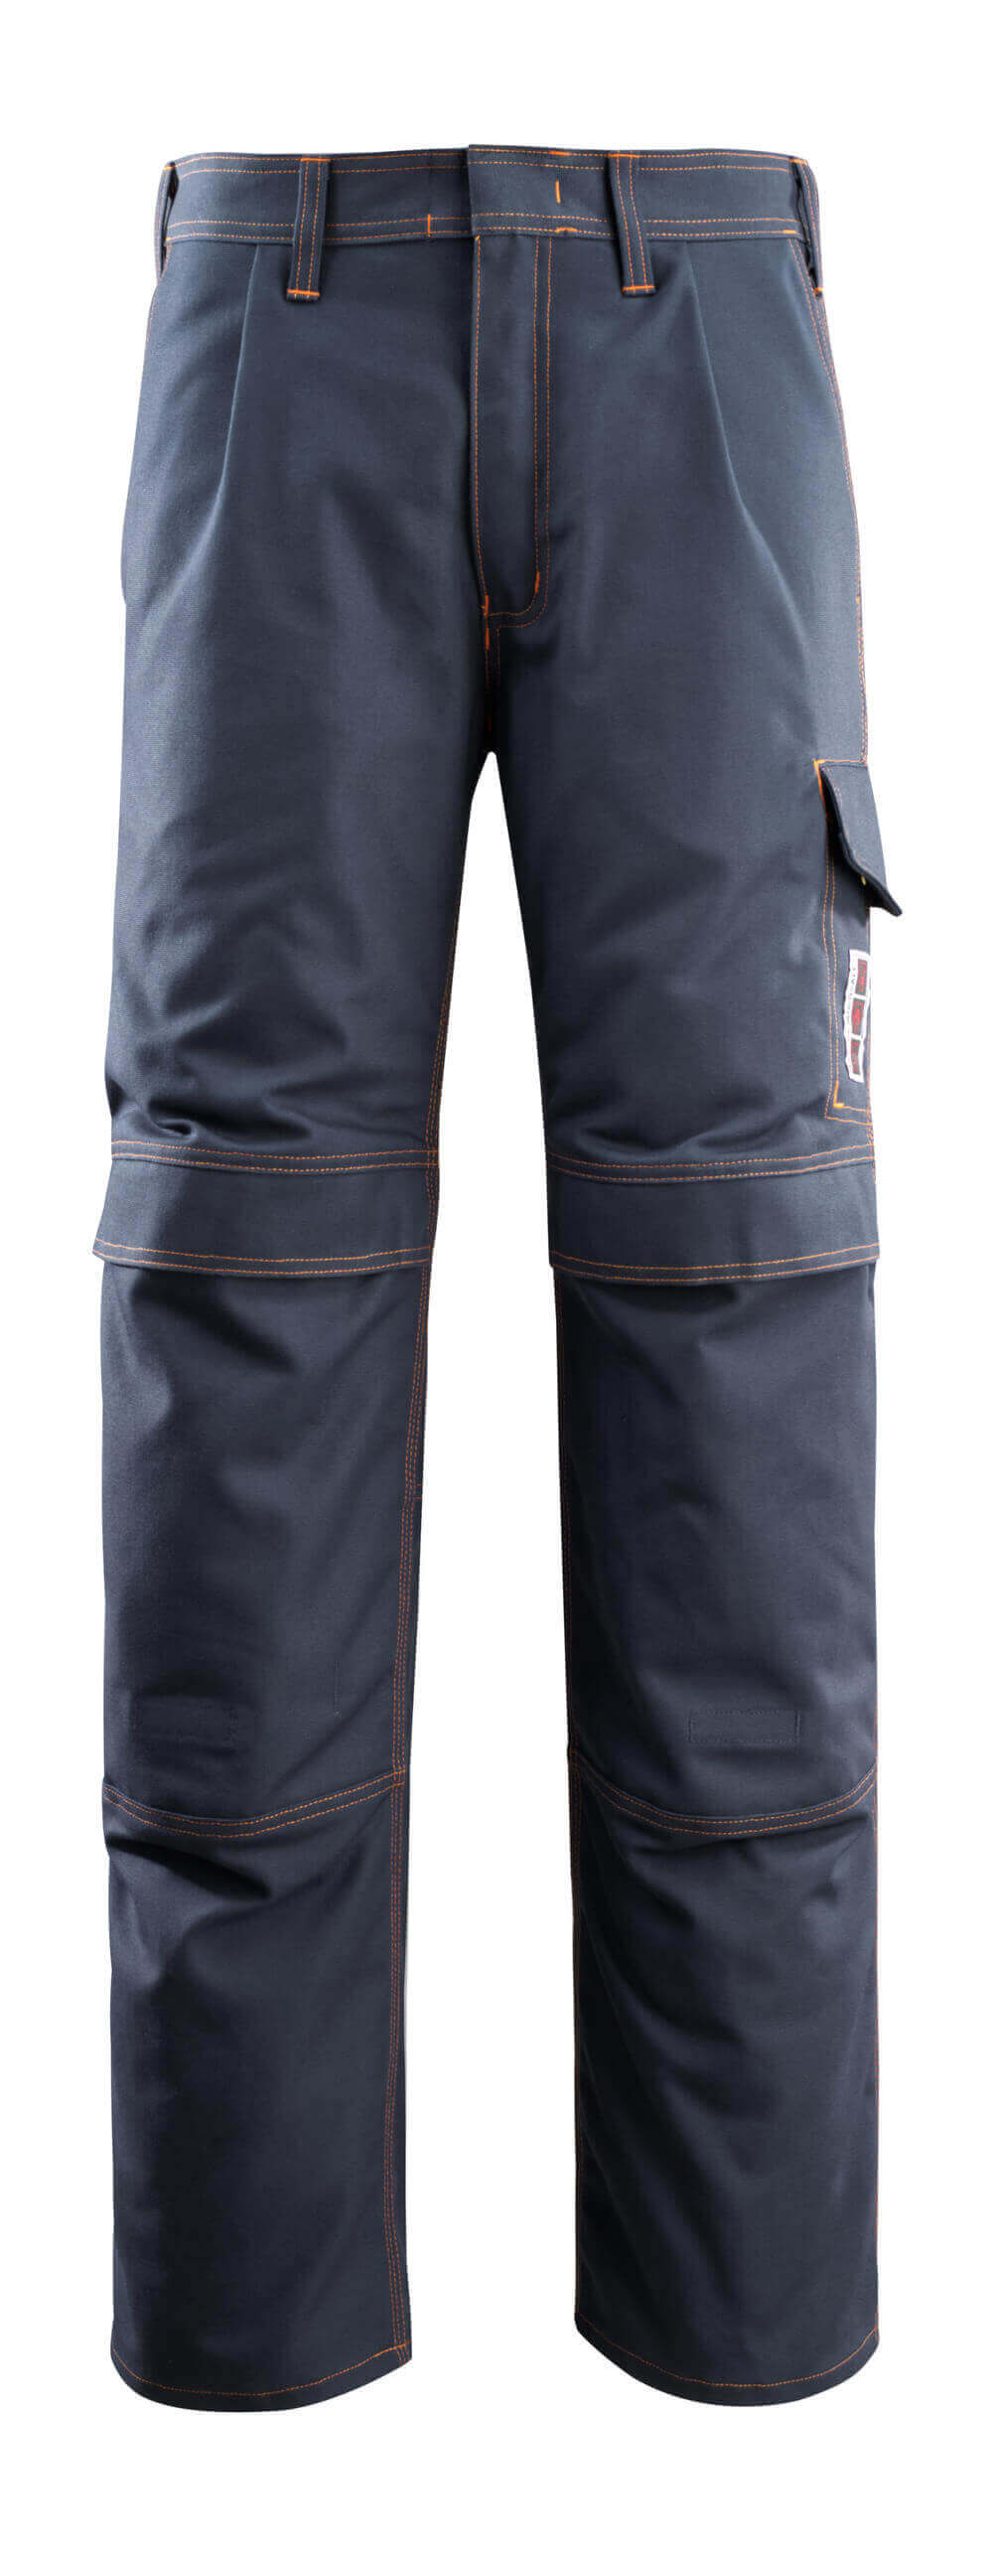 MASCOT®MULTISAFE Trousers with kneepad pockets Bex 6679 - DaltonSafety